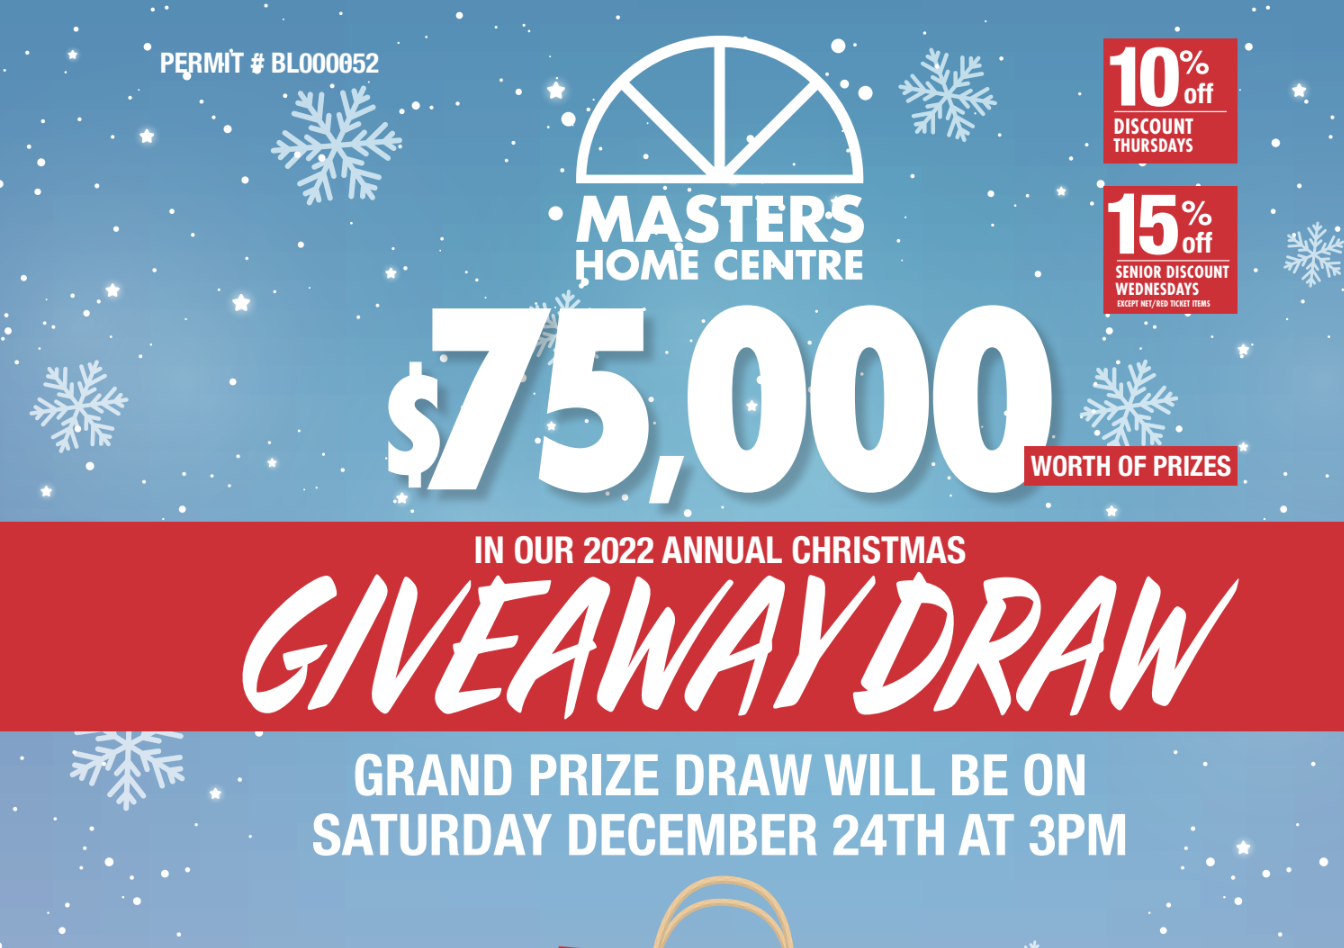 Masters Christmas Giveaway Draw!!